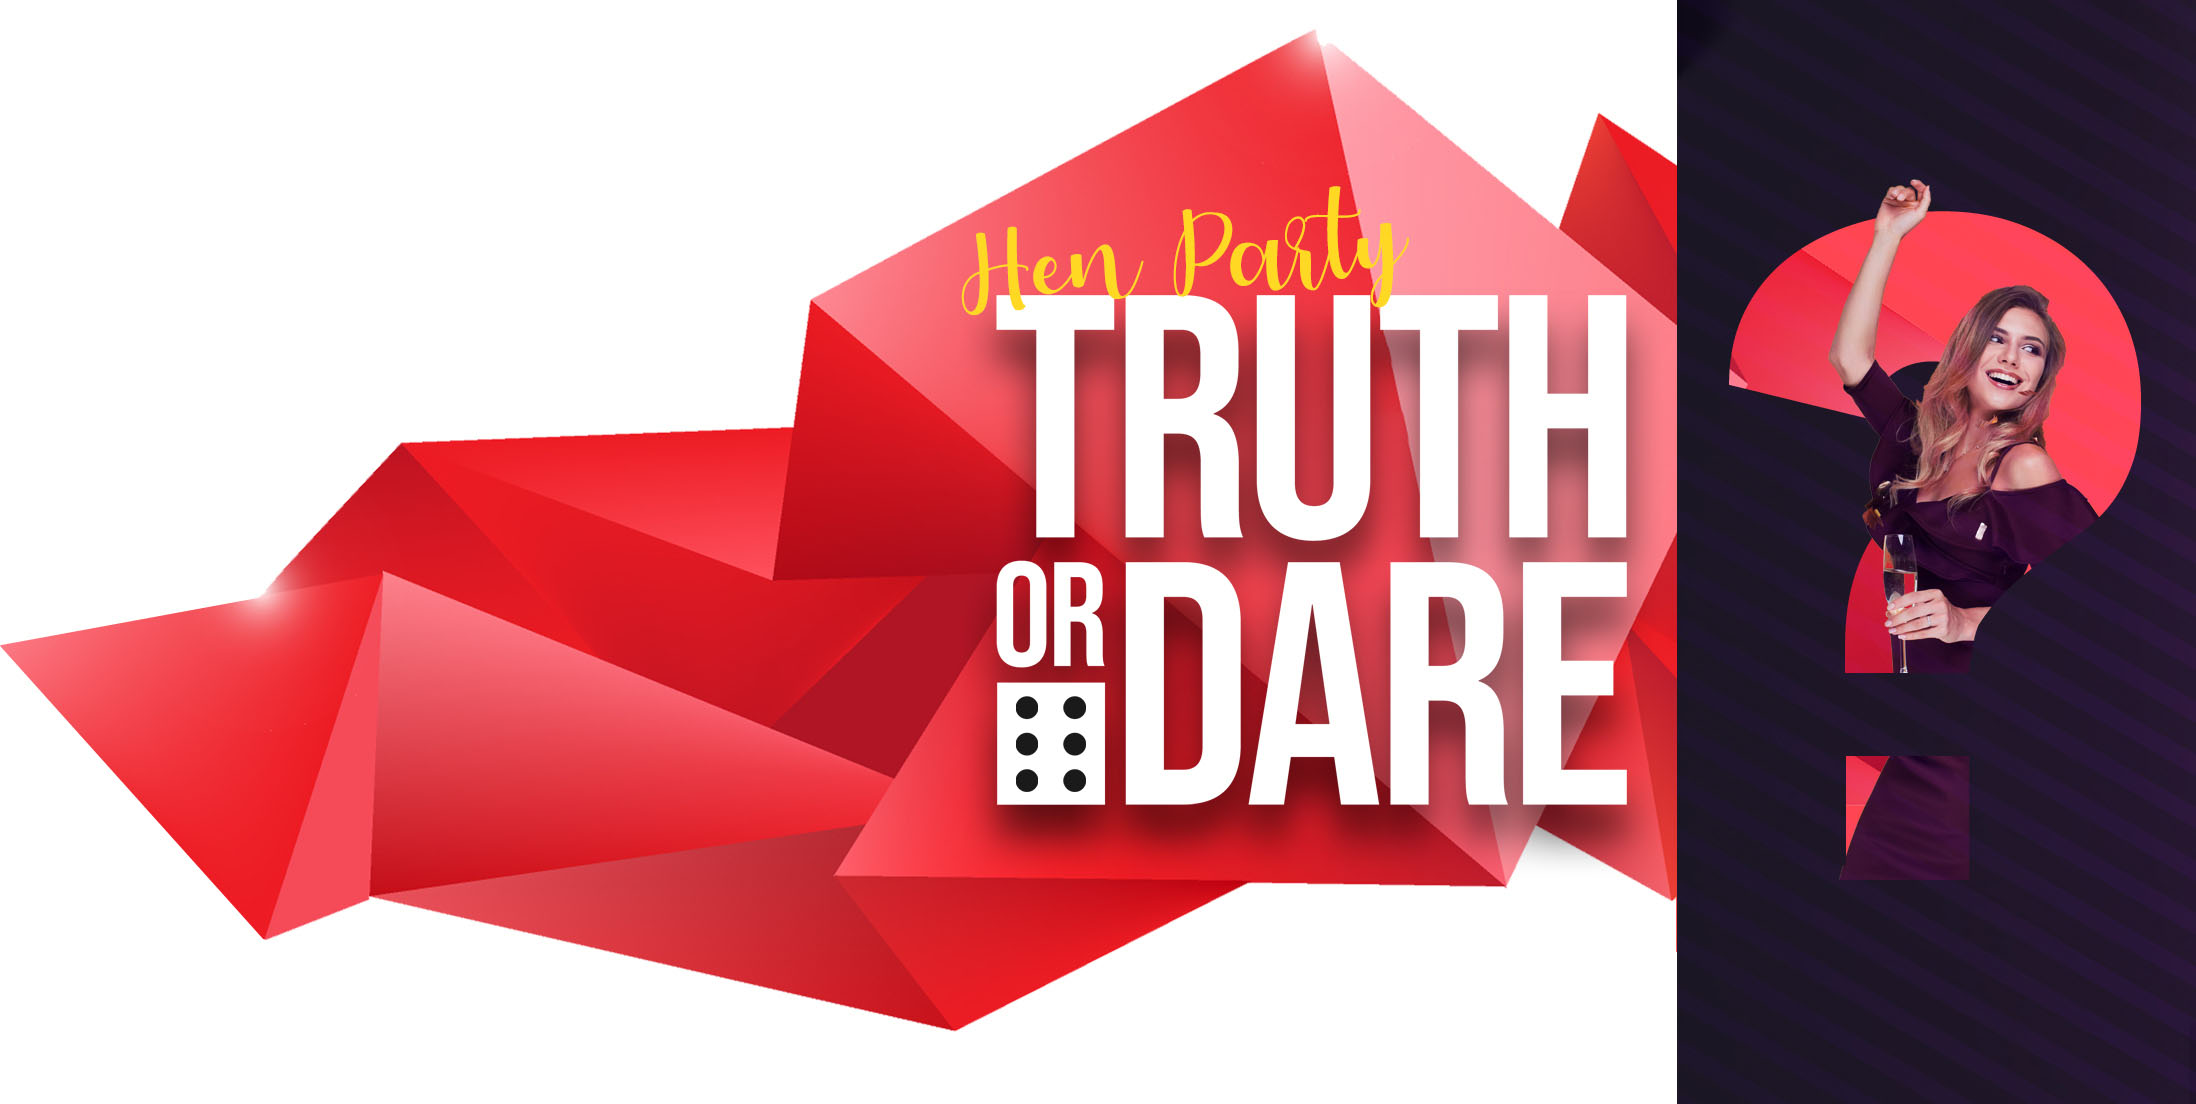 Hen Party Truth Or Dare Hen Party Ideas 